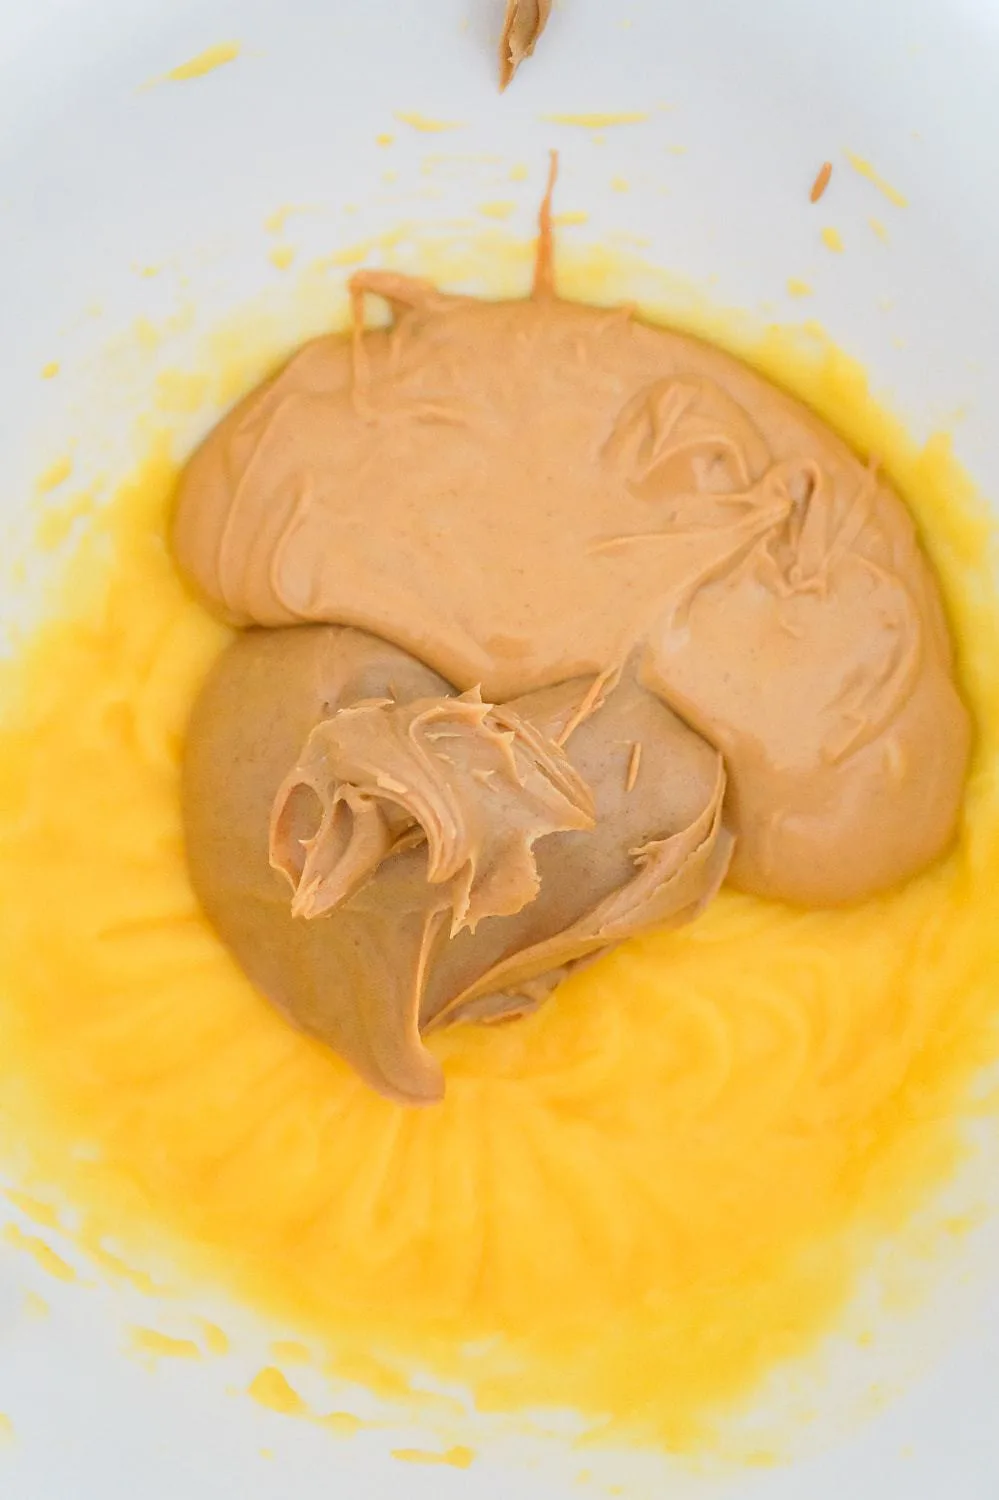 vanilla pudding mixture, smooth peanut butter and melted peanut butter chips in a mixing bowl.